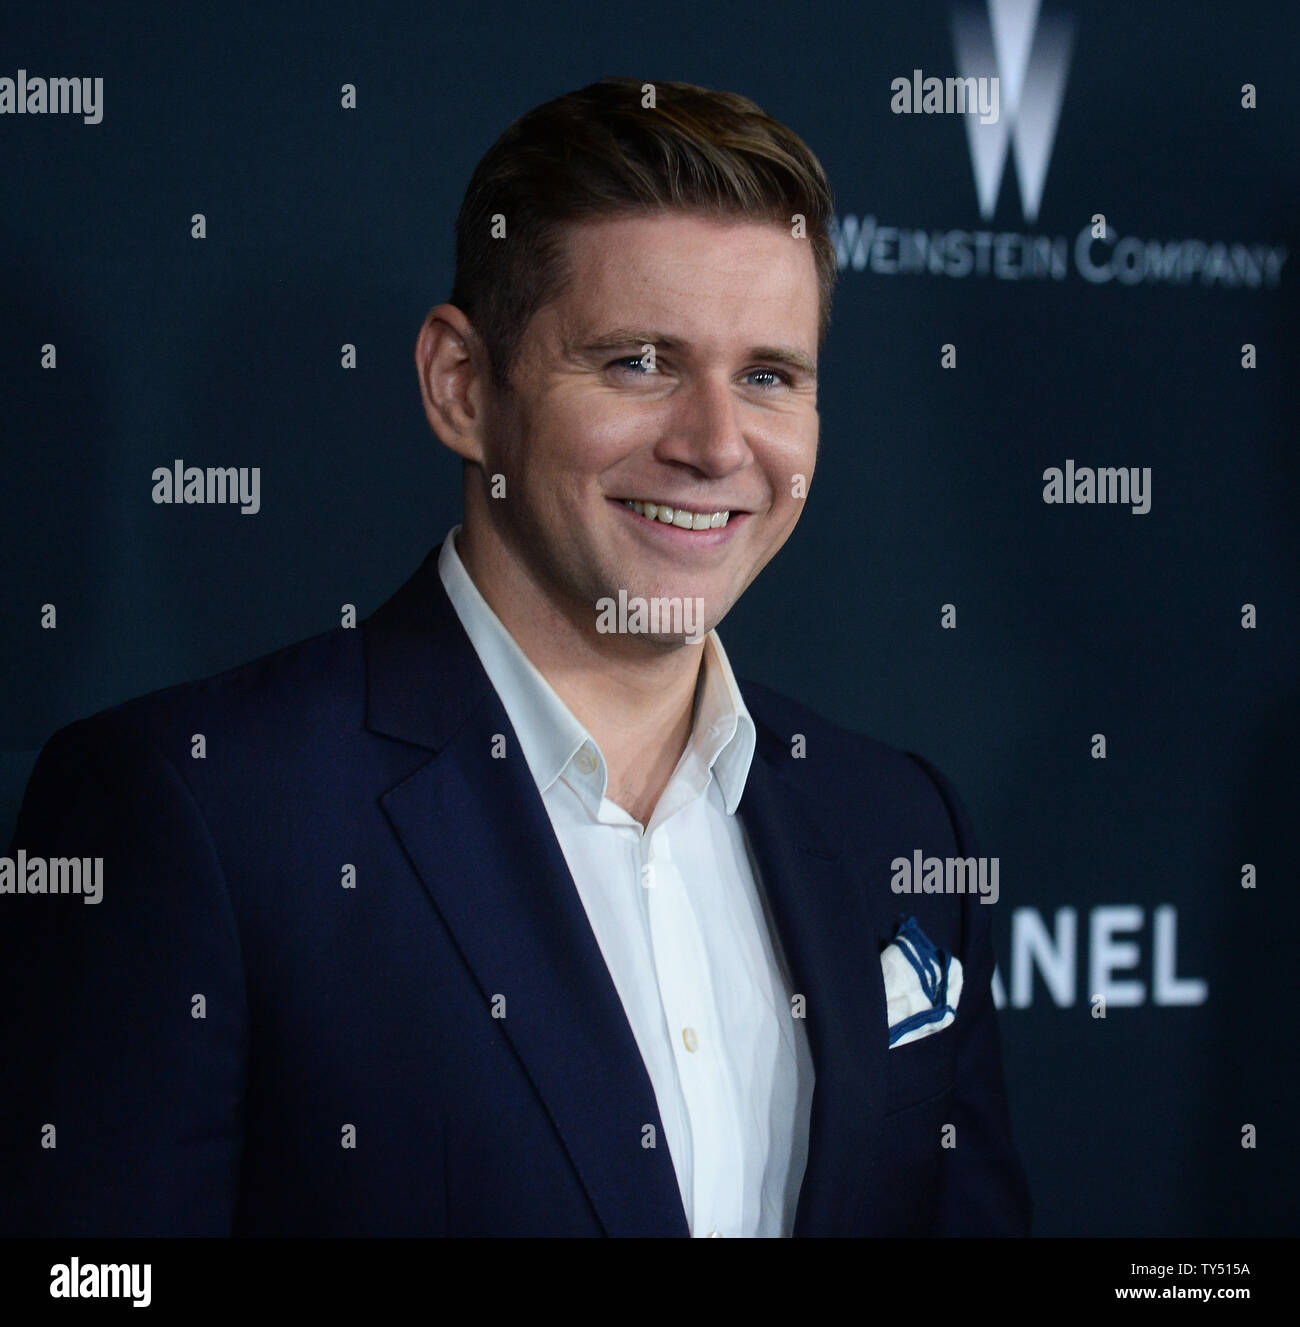 Cast member Allen Leech attends the premiere of the biographical motion picture war drama 'The Imitation Game' at the Directors Guild of America (DGA) in Los Angeles on November 10, 2014. Storyline: English mathematician and logician, Alan Turing (Benedict Cumberbatch), helps crack the Enigma code in a nail-biting race against time during the darkest days of World War II.  UPI/Jim Ruymen Stock Photo